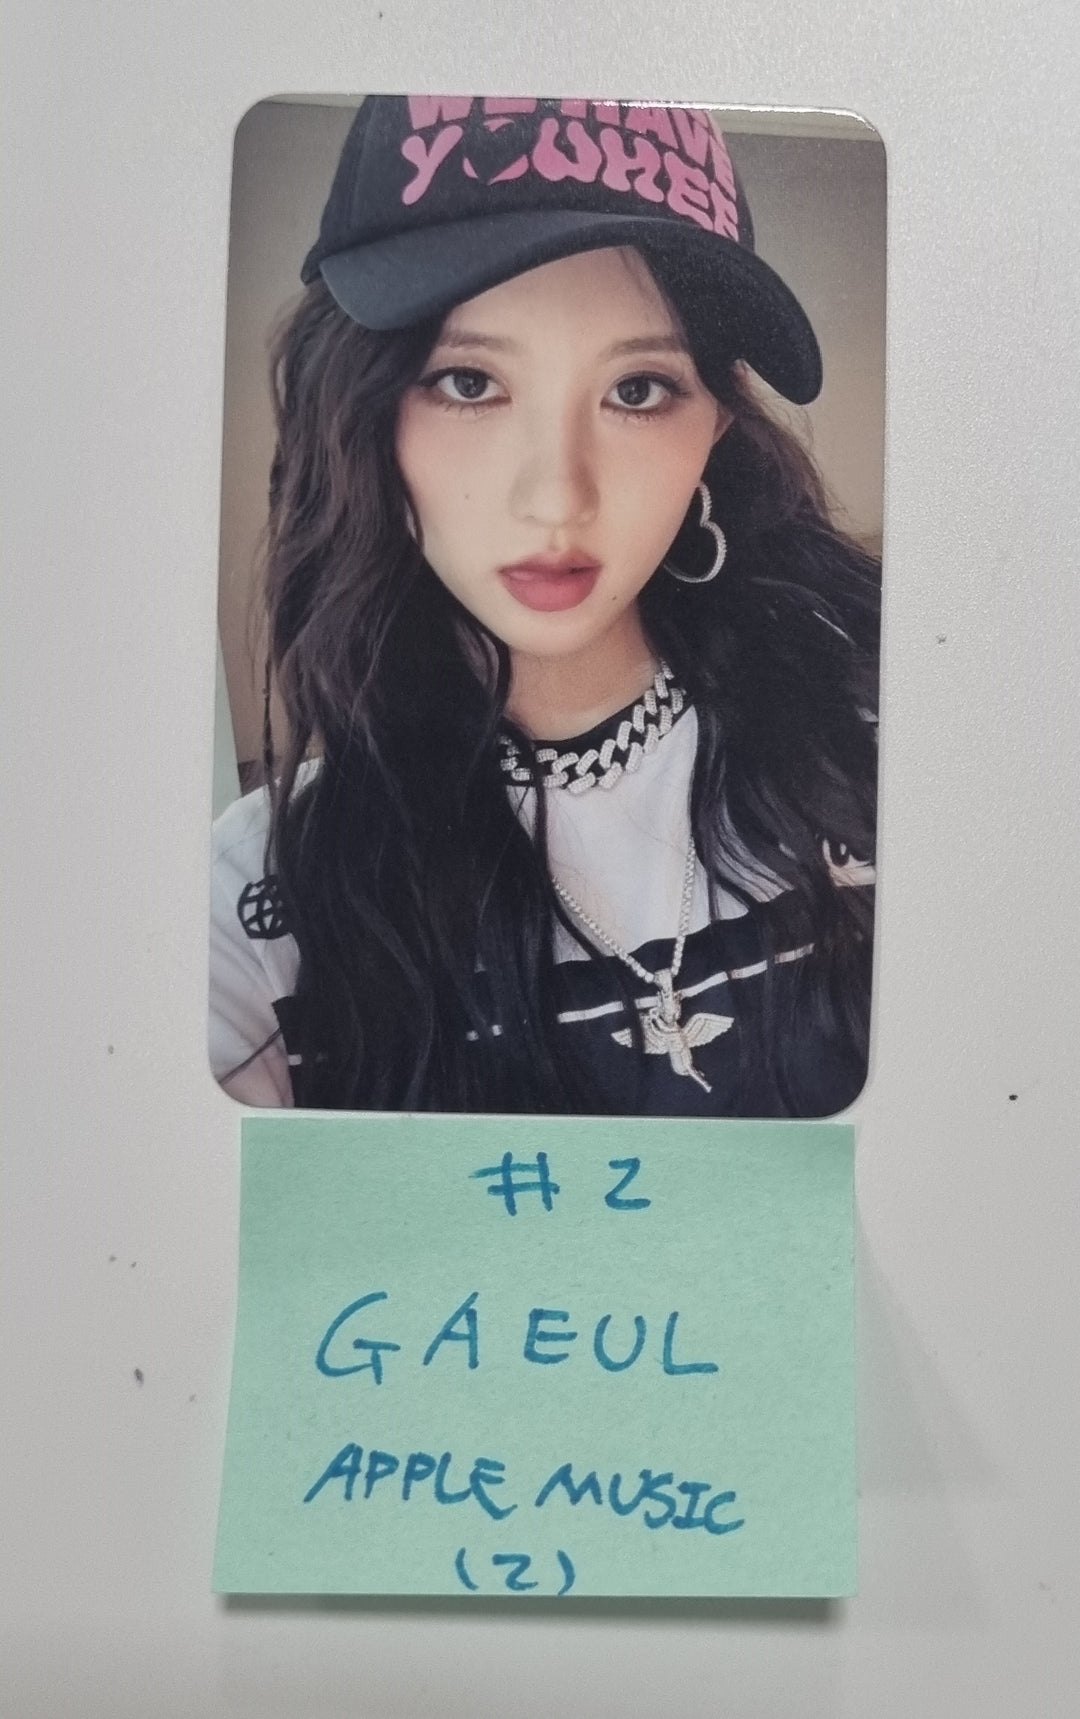 IVE "I'VE MINE" 1st EP - Apple Music Fansign Event Photocard Round 2 [23.11.03]